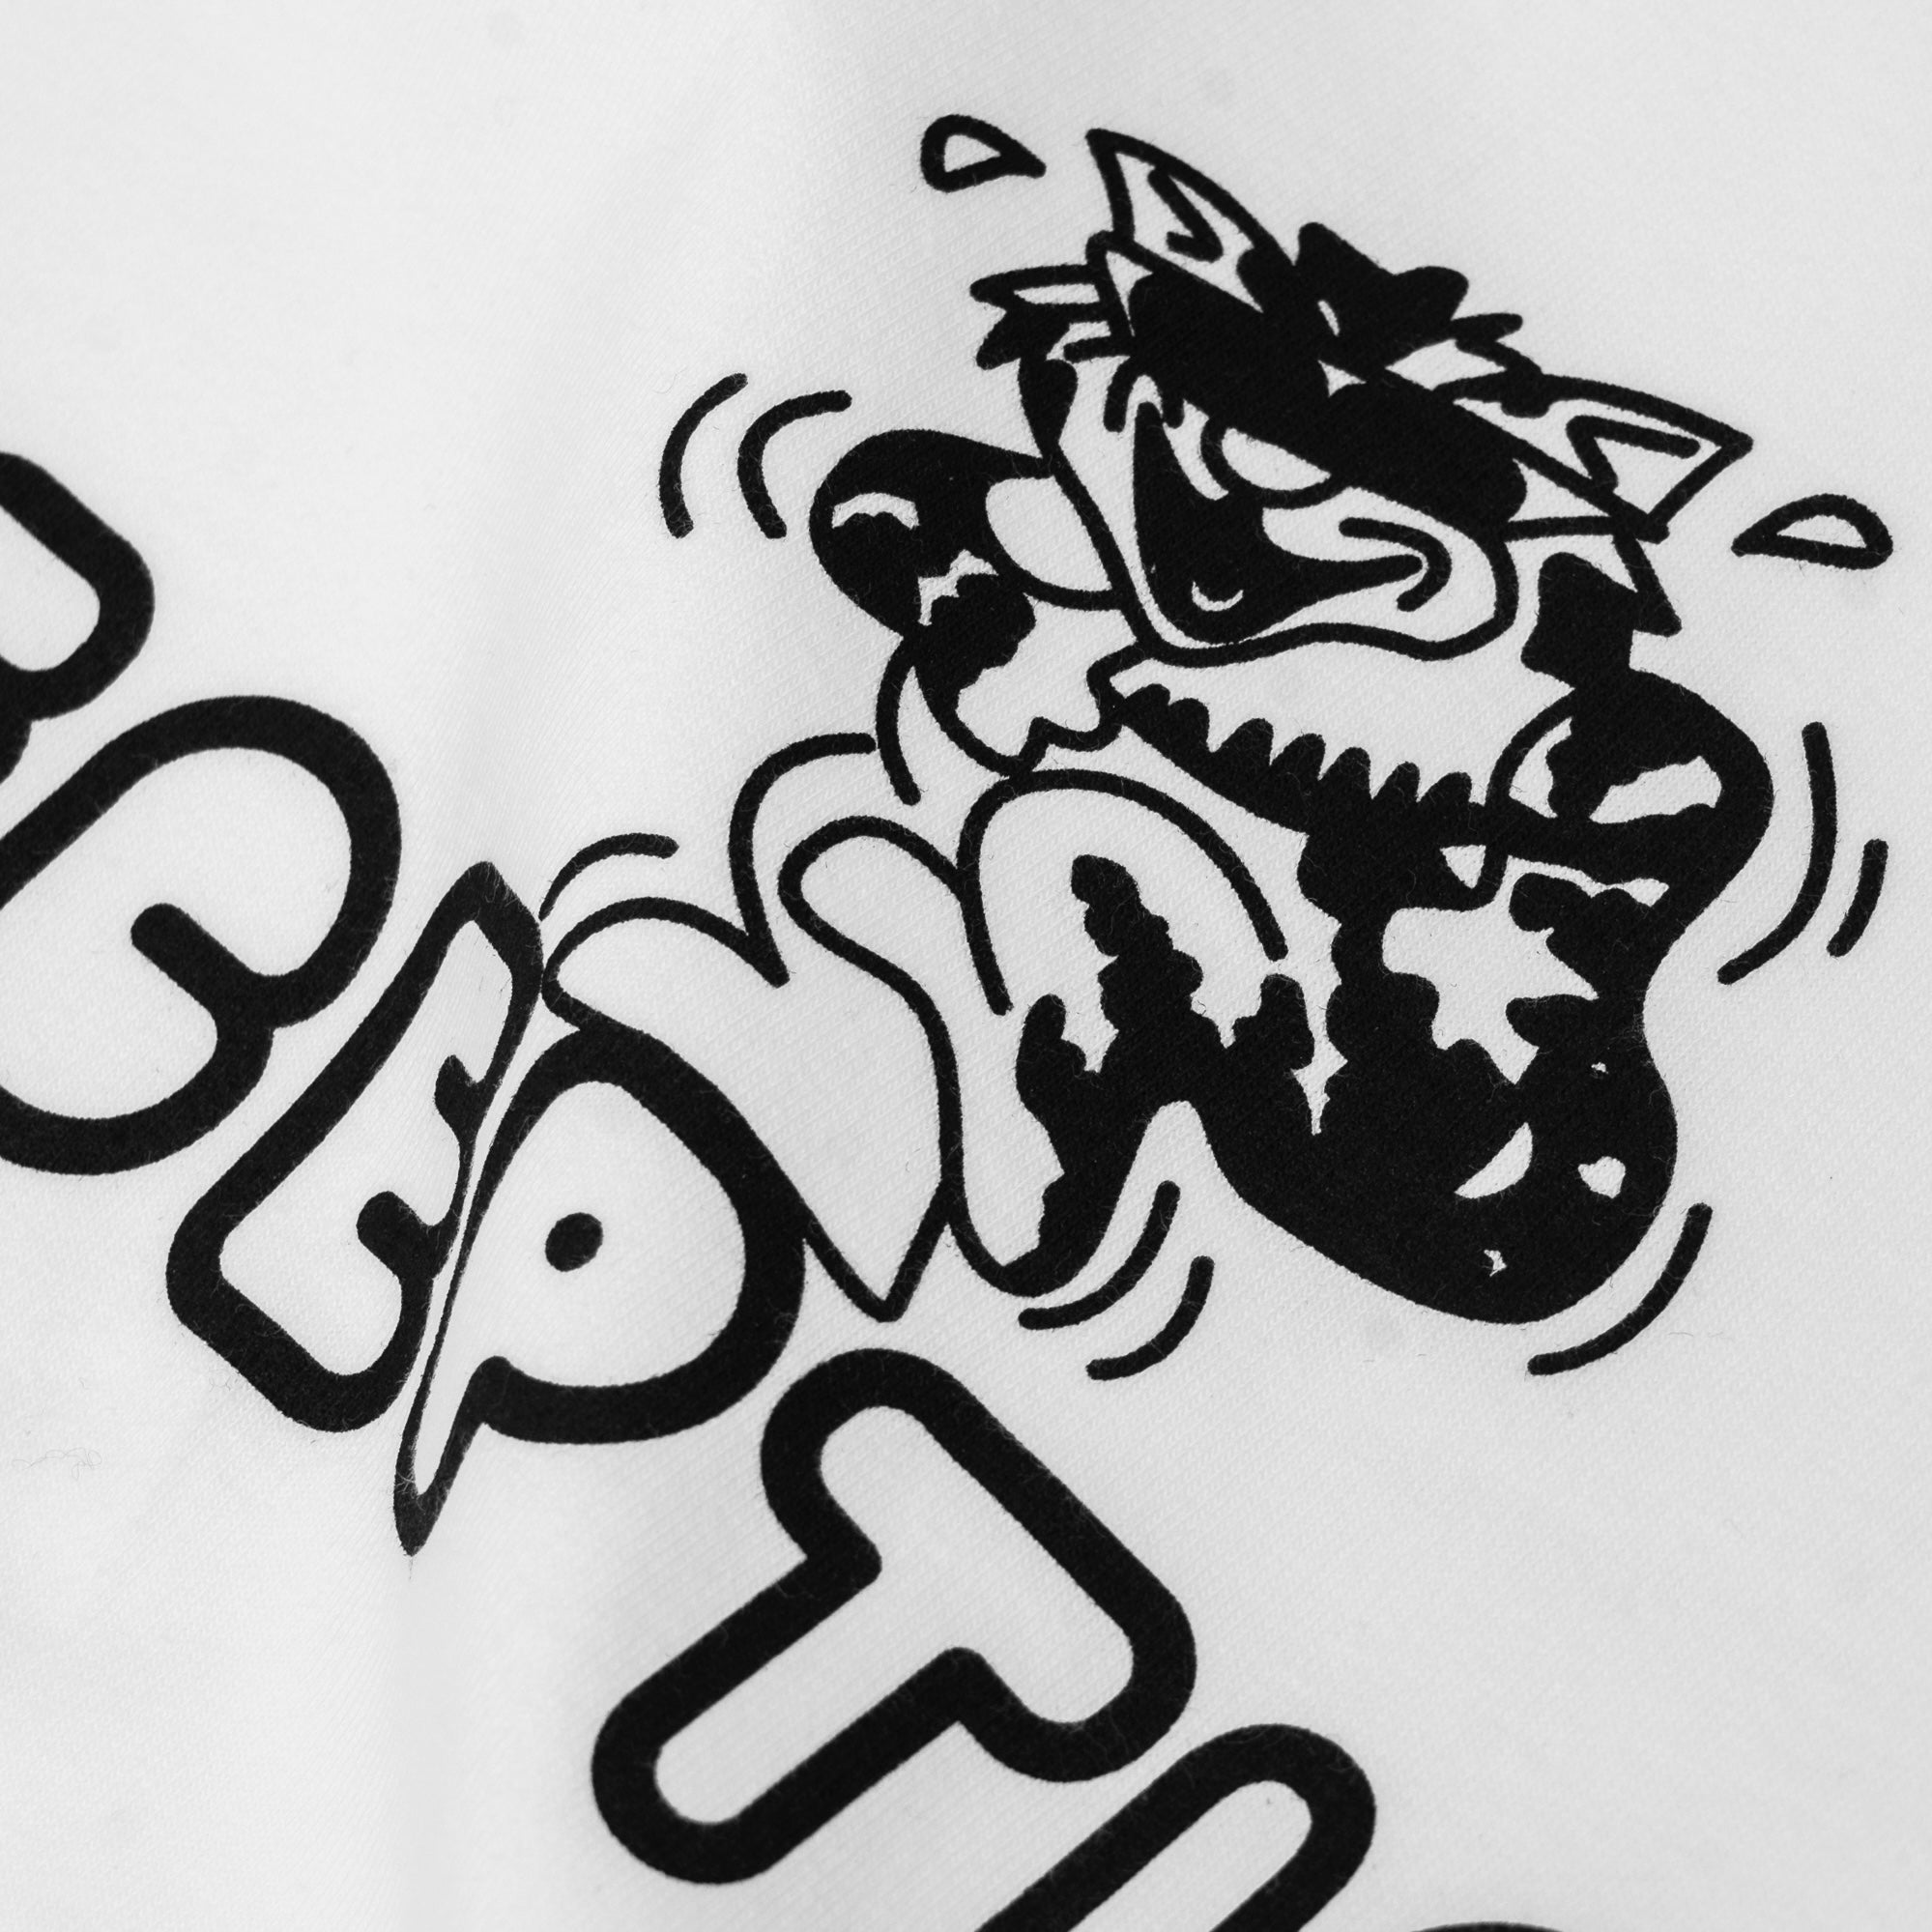 Reception - Cool Cat LS Tee (White)